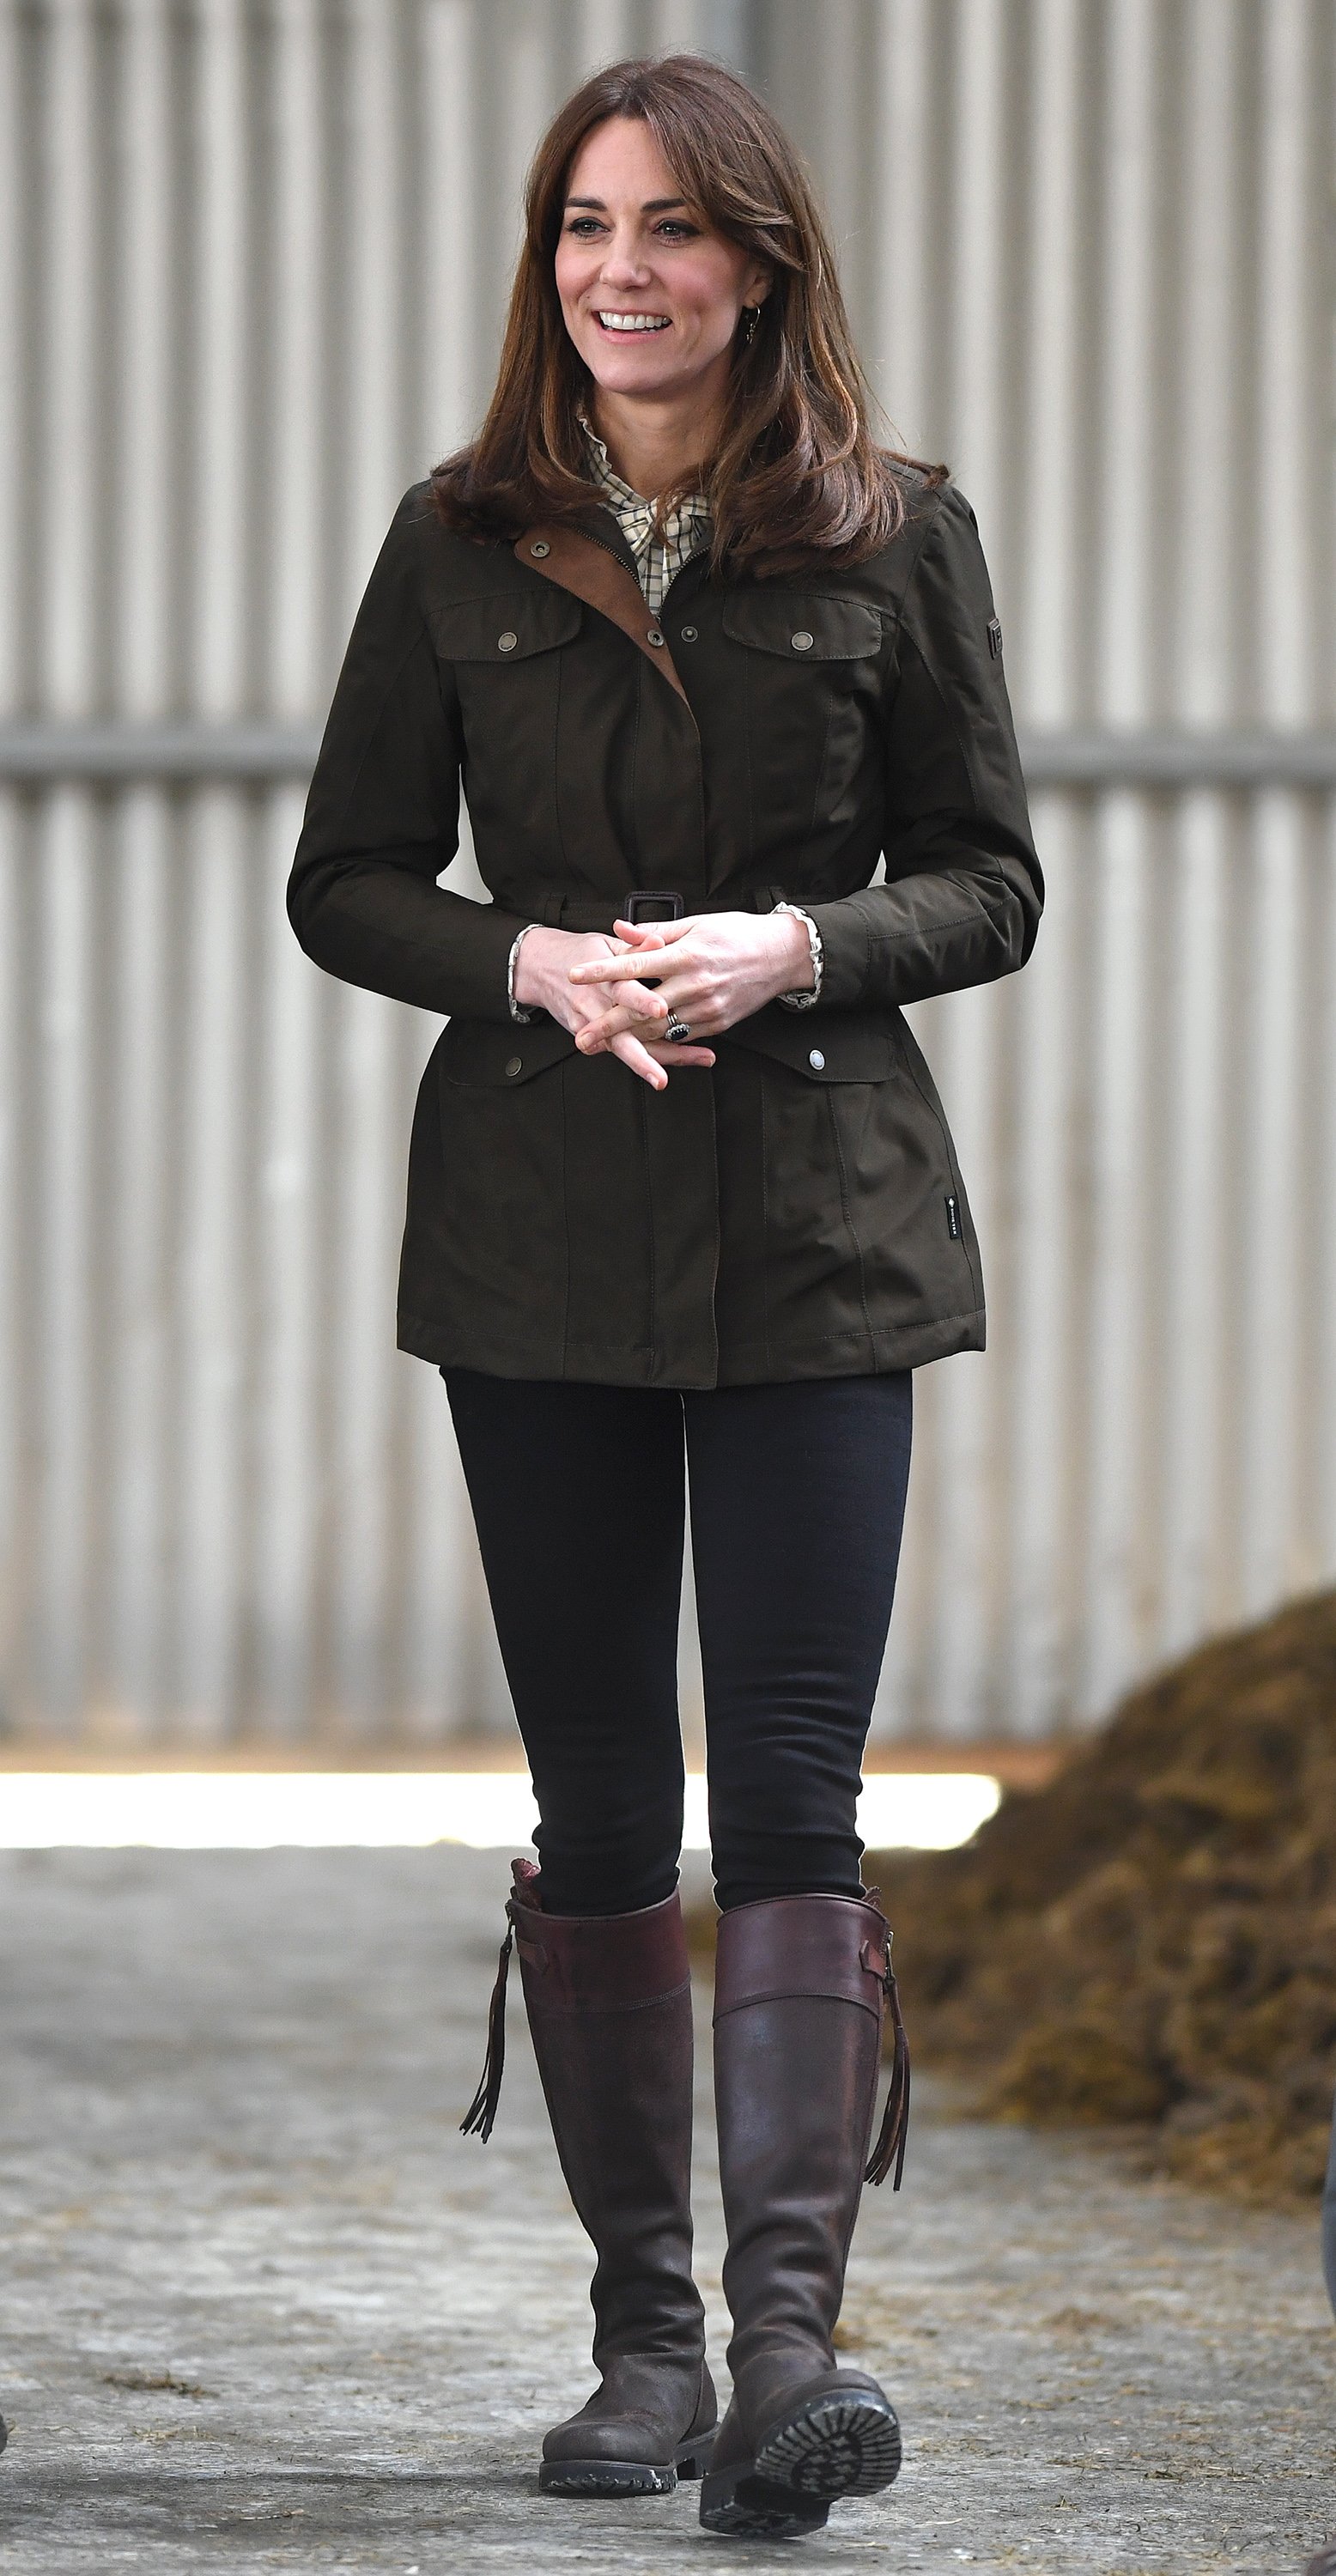 Kate Middleton pictured in her boots at Teagasc Research Farm’ in 2020, Carlow, Ireland. | Photo: Getty Images